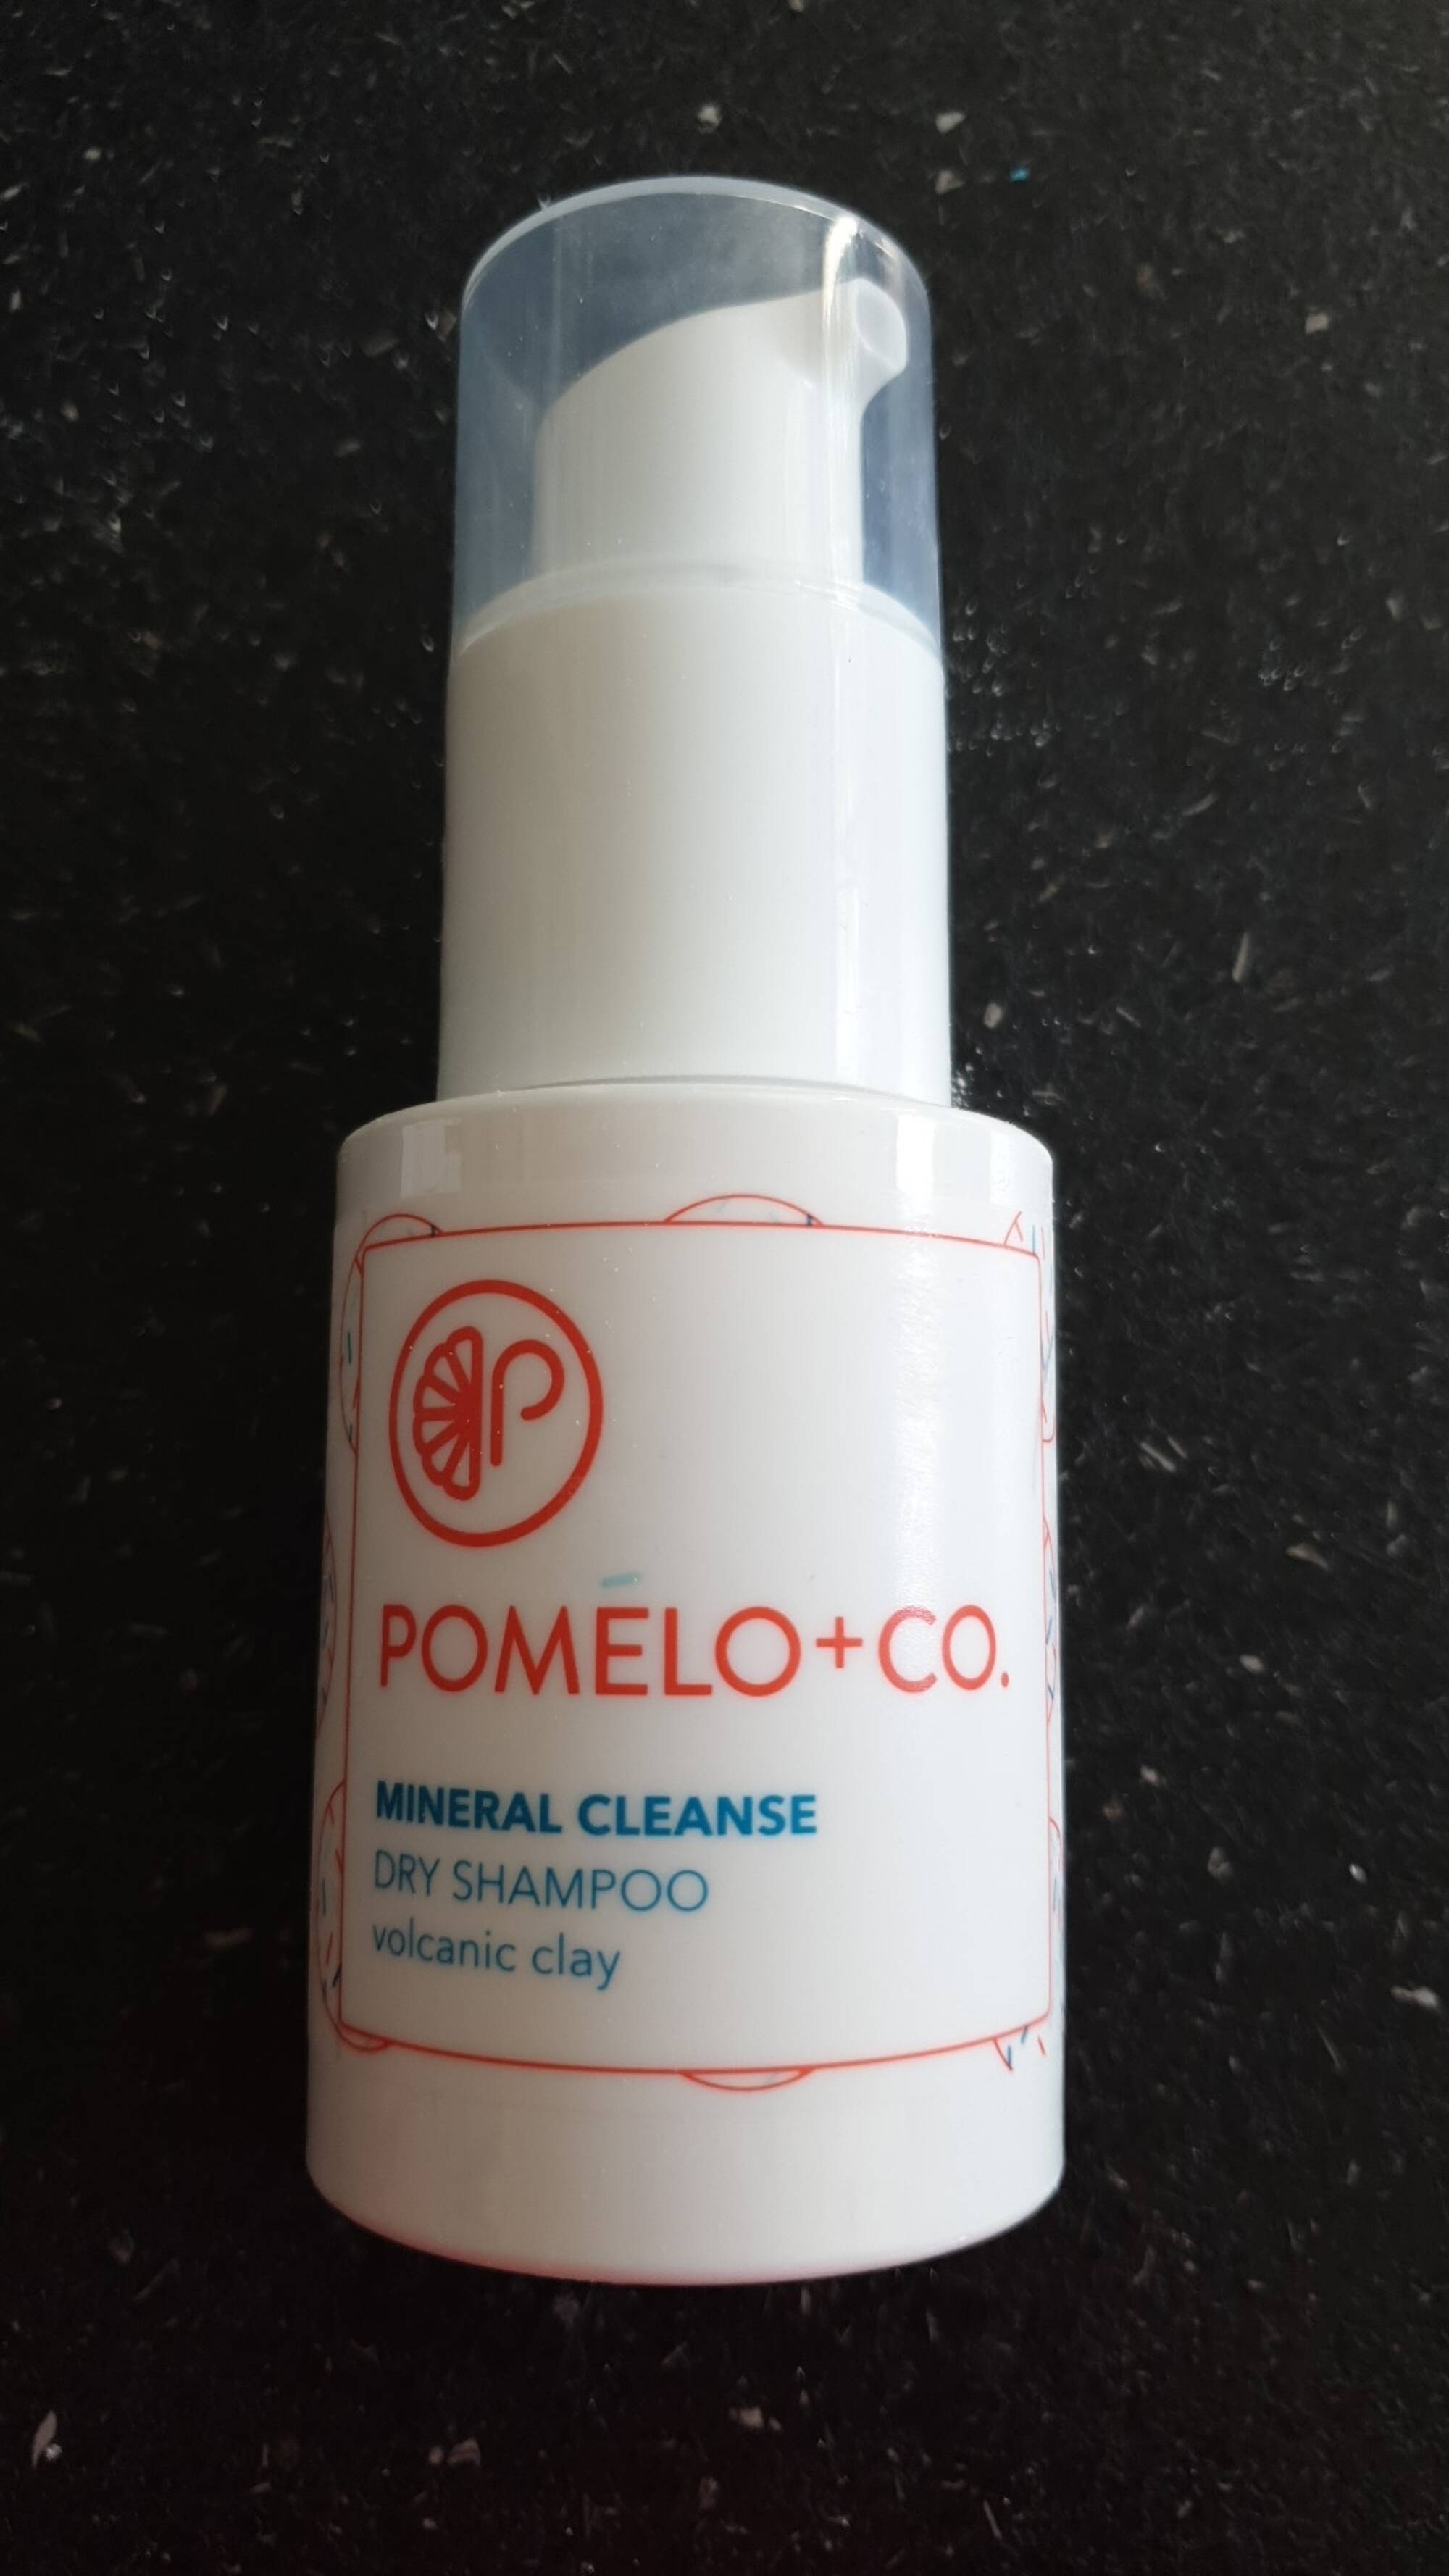 POMELO-CO - Mineral cleanse - Dry shampoo